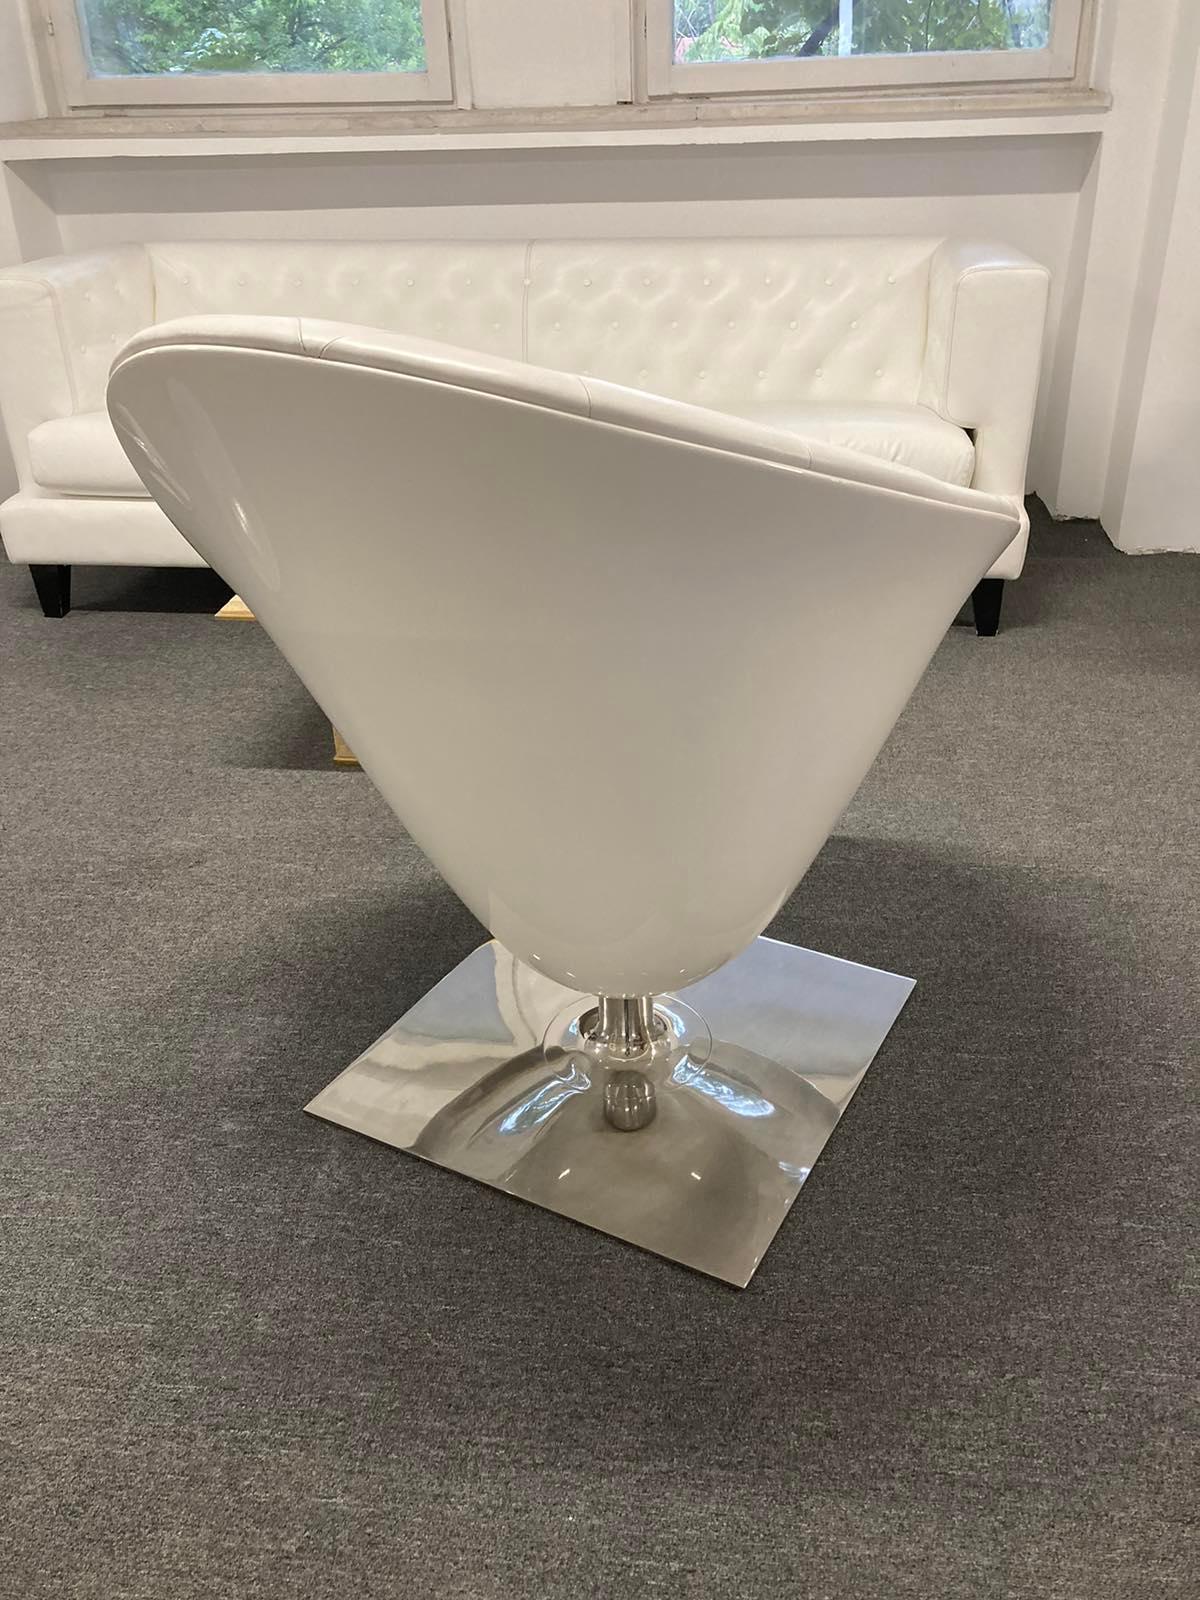 Italian swivel armchair made in fine white leather designed by Philippe Starck who inspired fundamental figures in a project decryption. This piece called Moor(e) is more likely to be a tribute to Henry Moore the great British sculptor. Certainly,